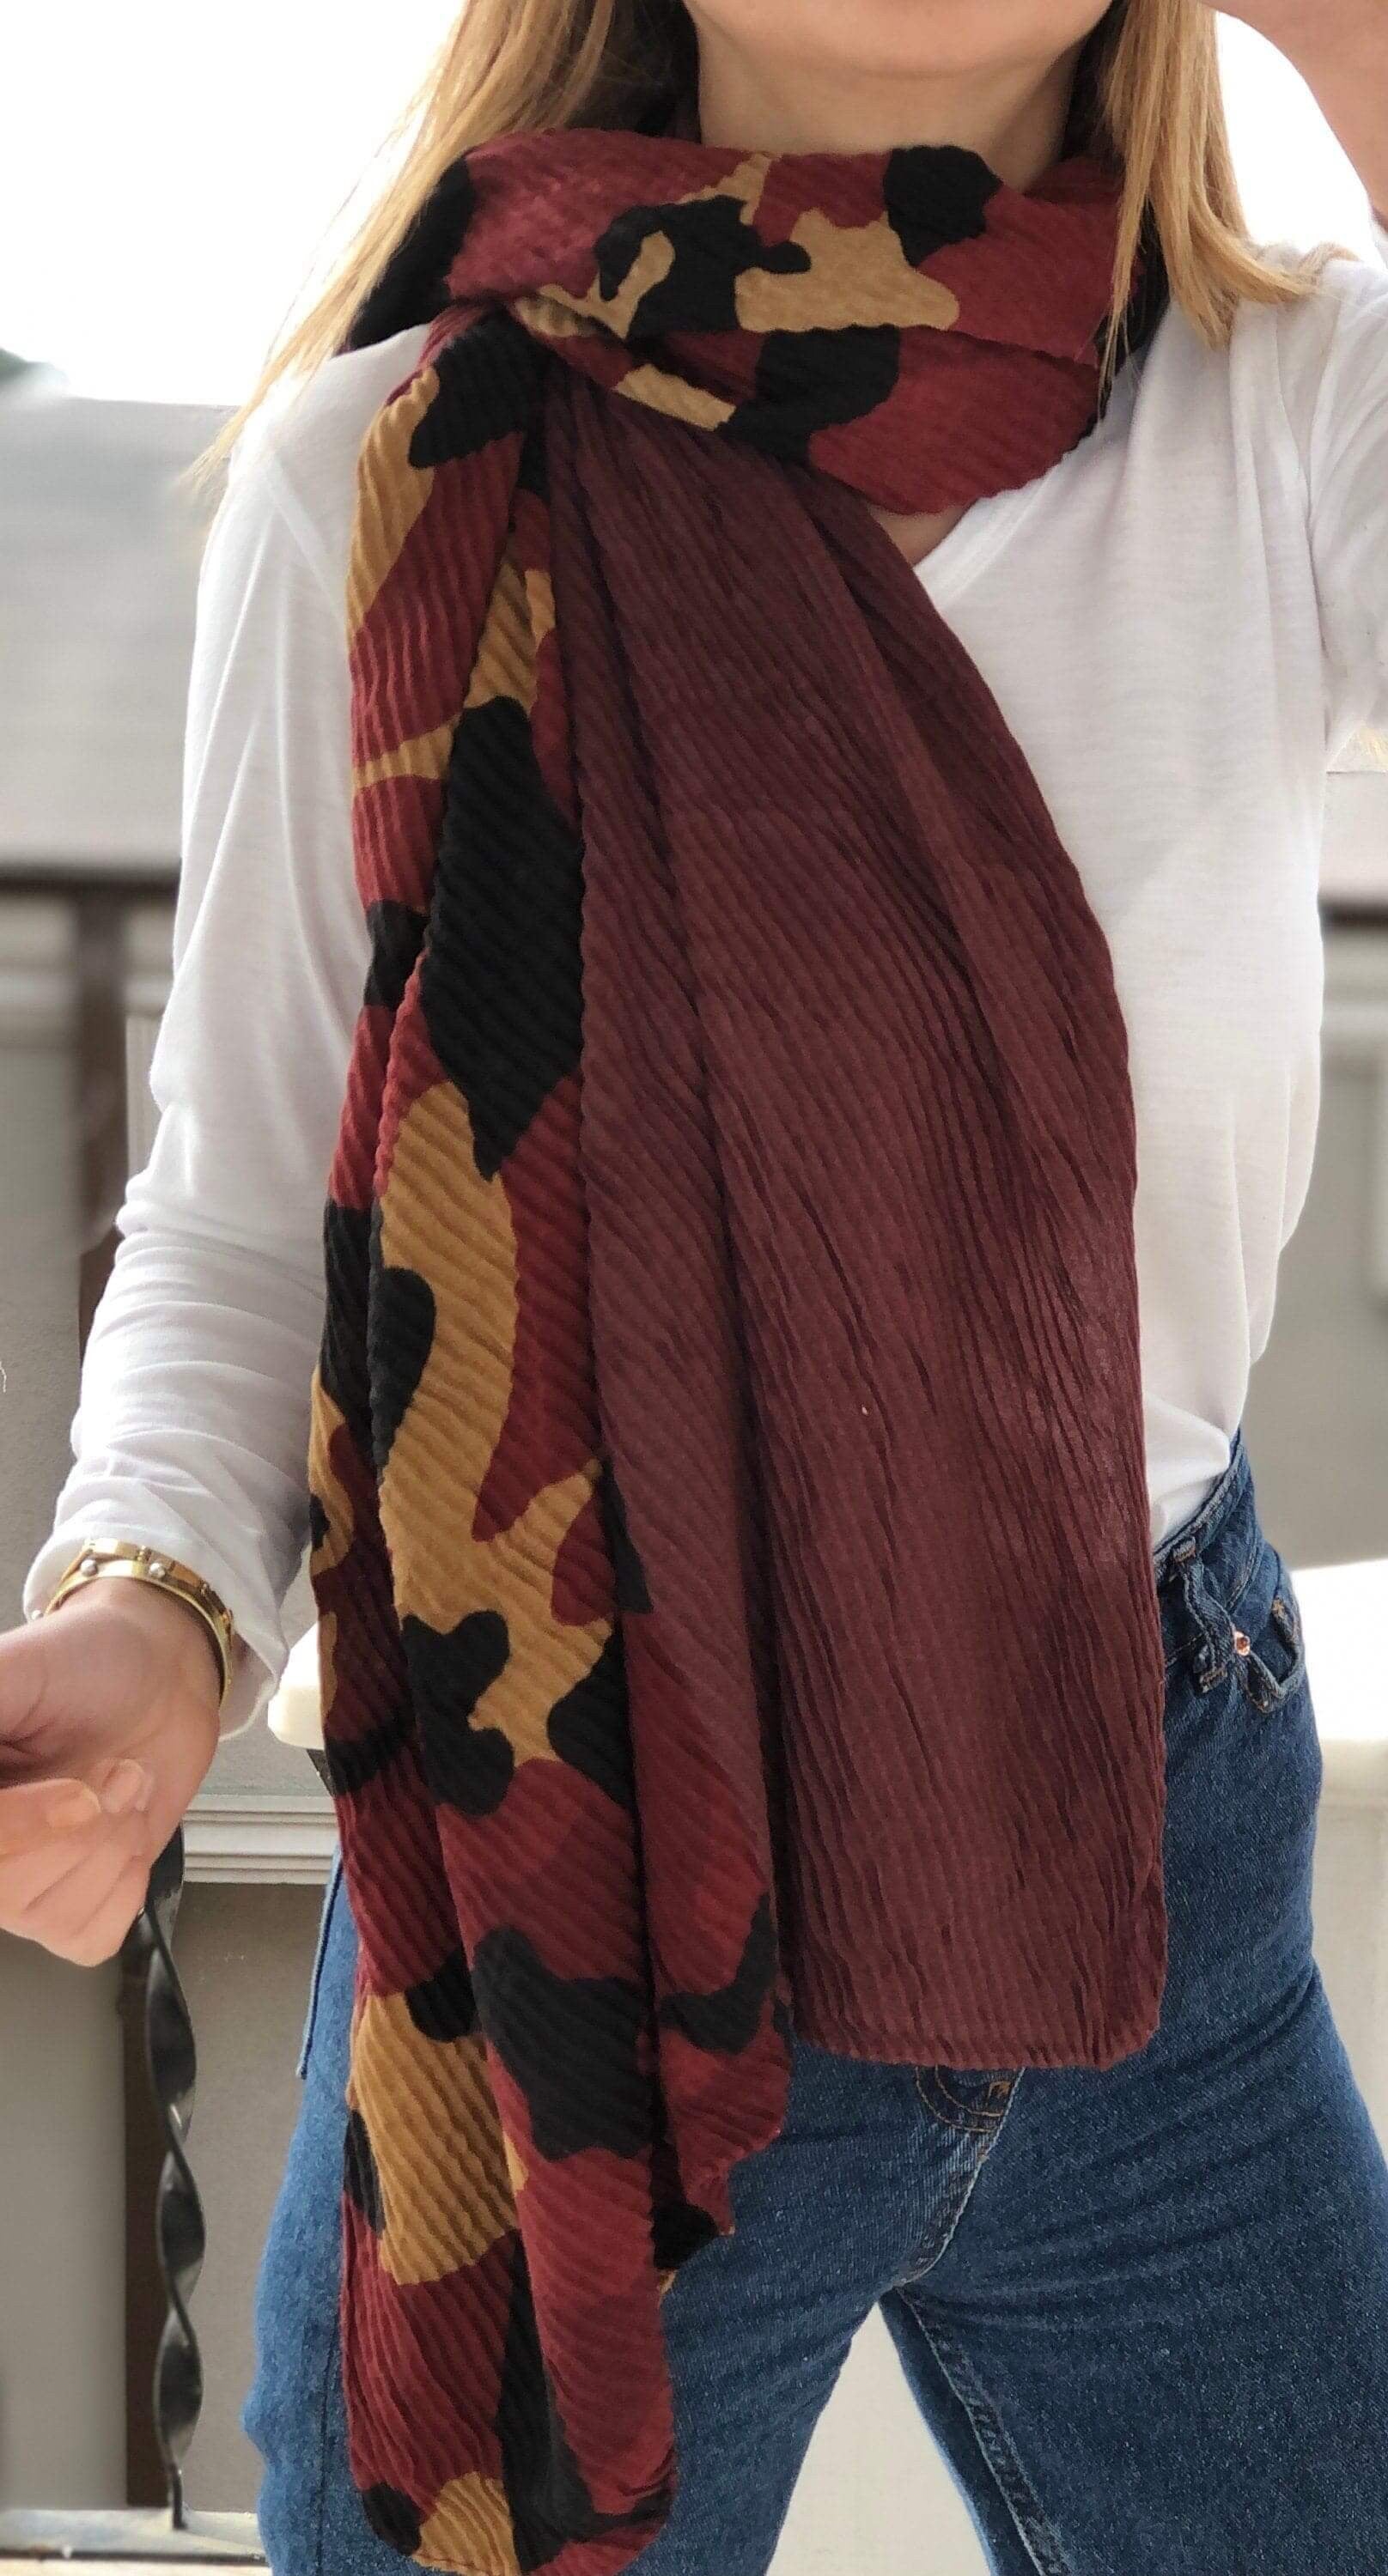 Wrap yourself in this beautiful rectangle scarf and feel cozy all day long